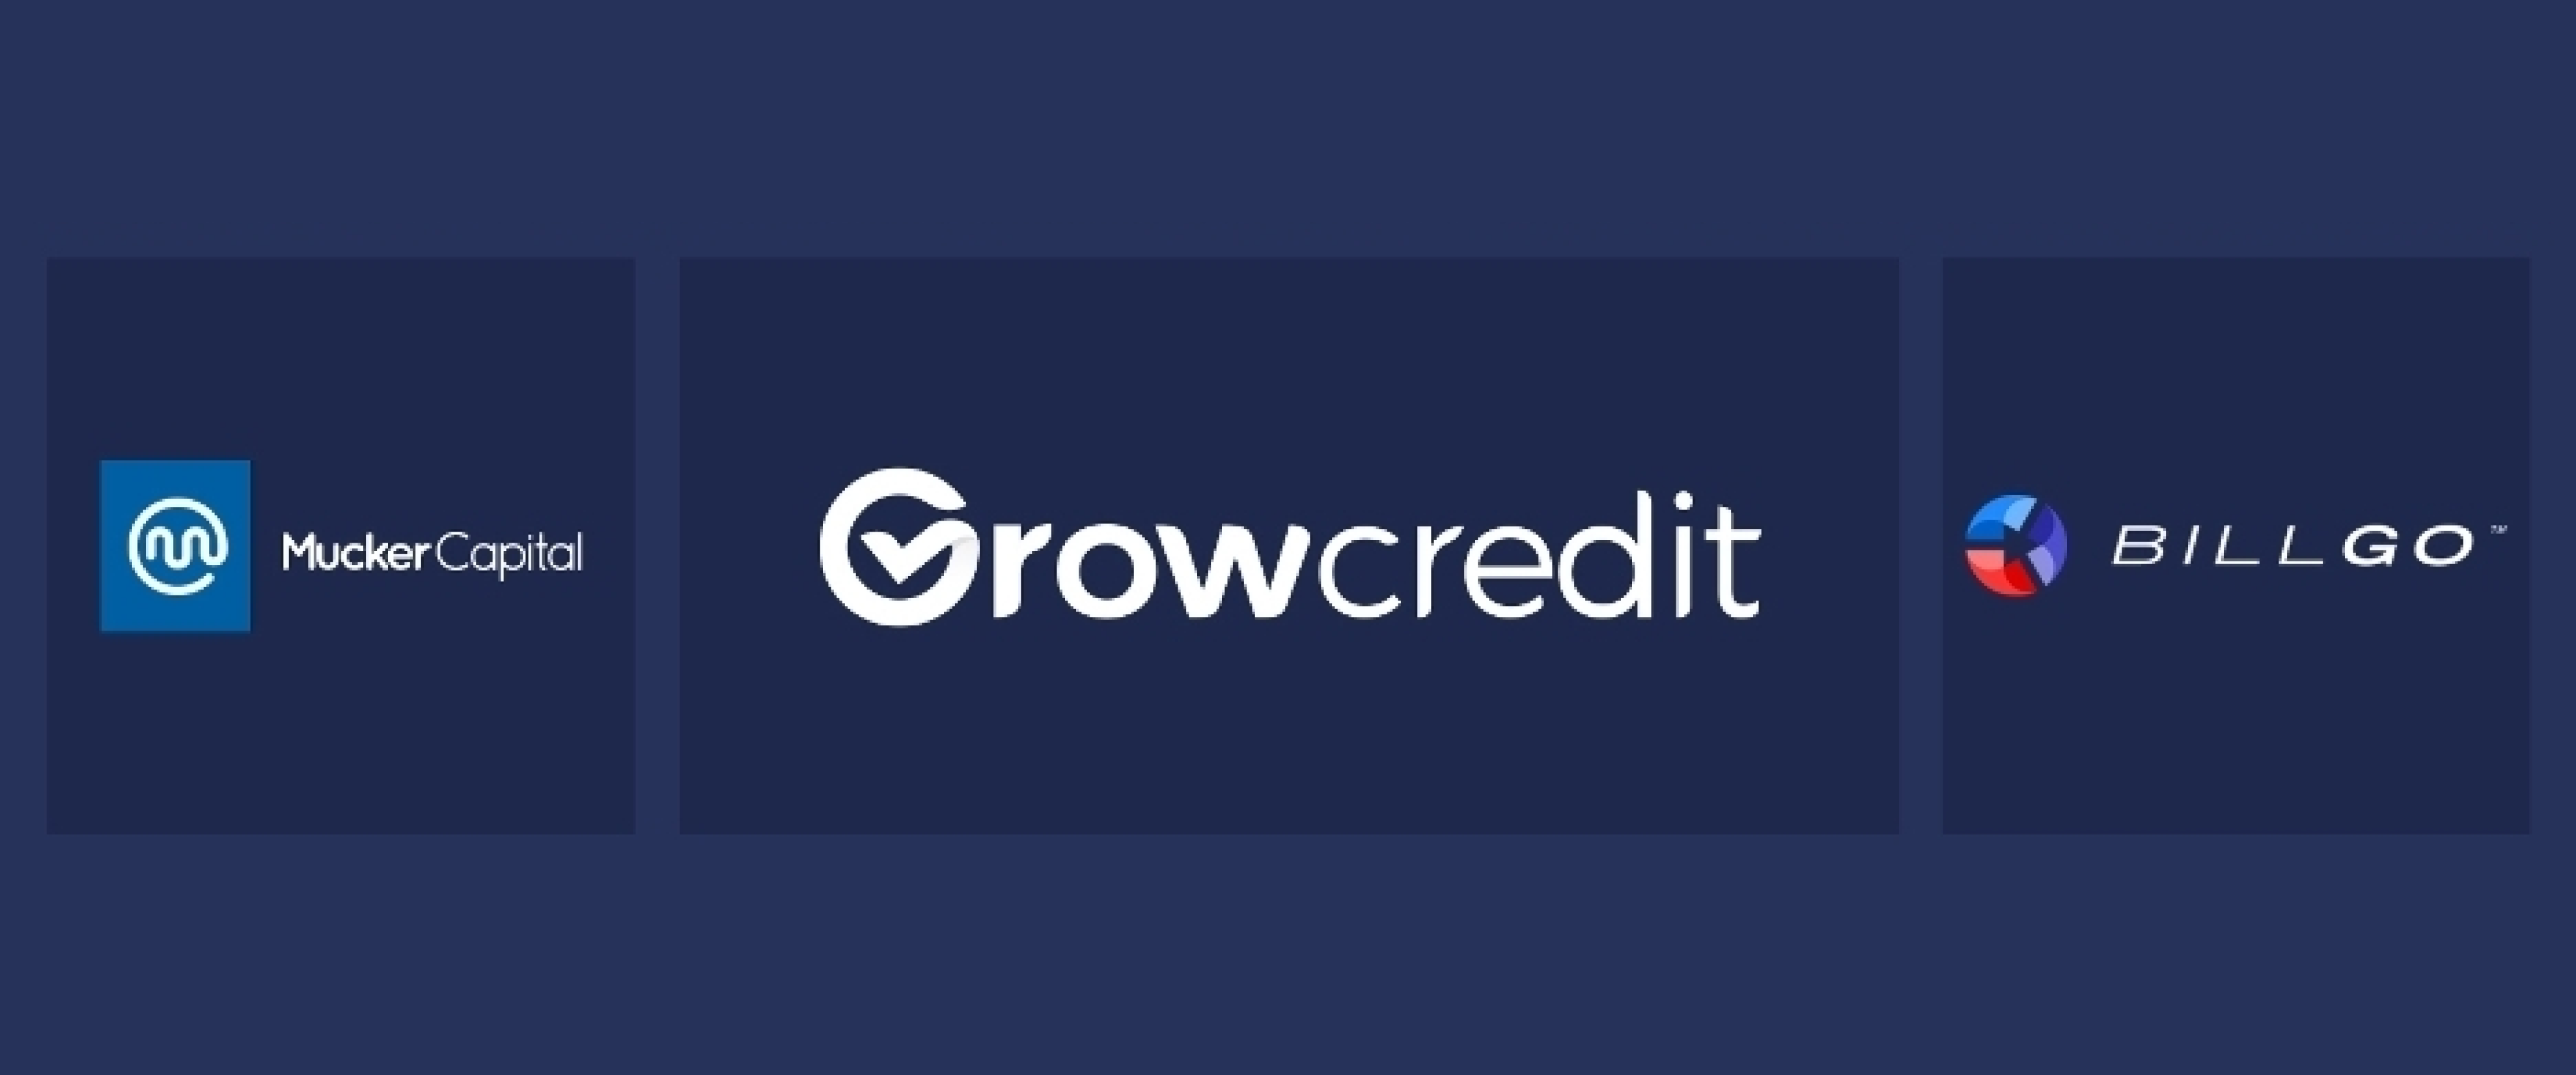 Grow Credit Secures $106 Million to Offer Banks, Apps, Websites, and Employers a Platform to Help Consumers Build Credit and Save on Subscription Payments